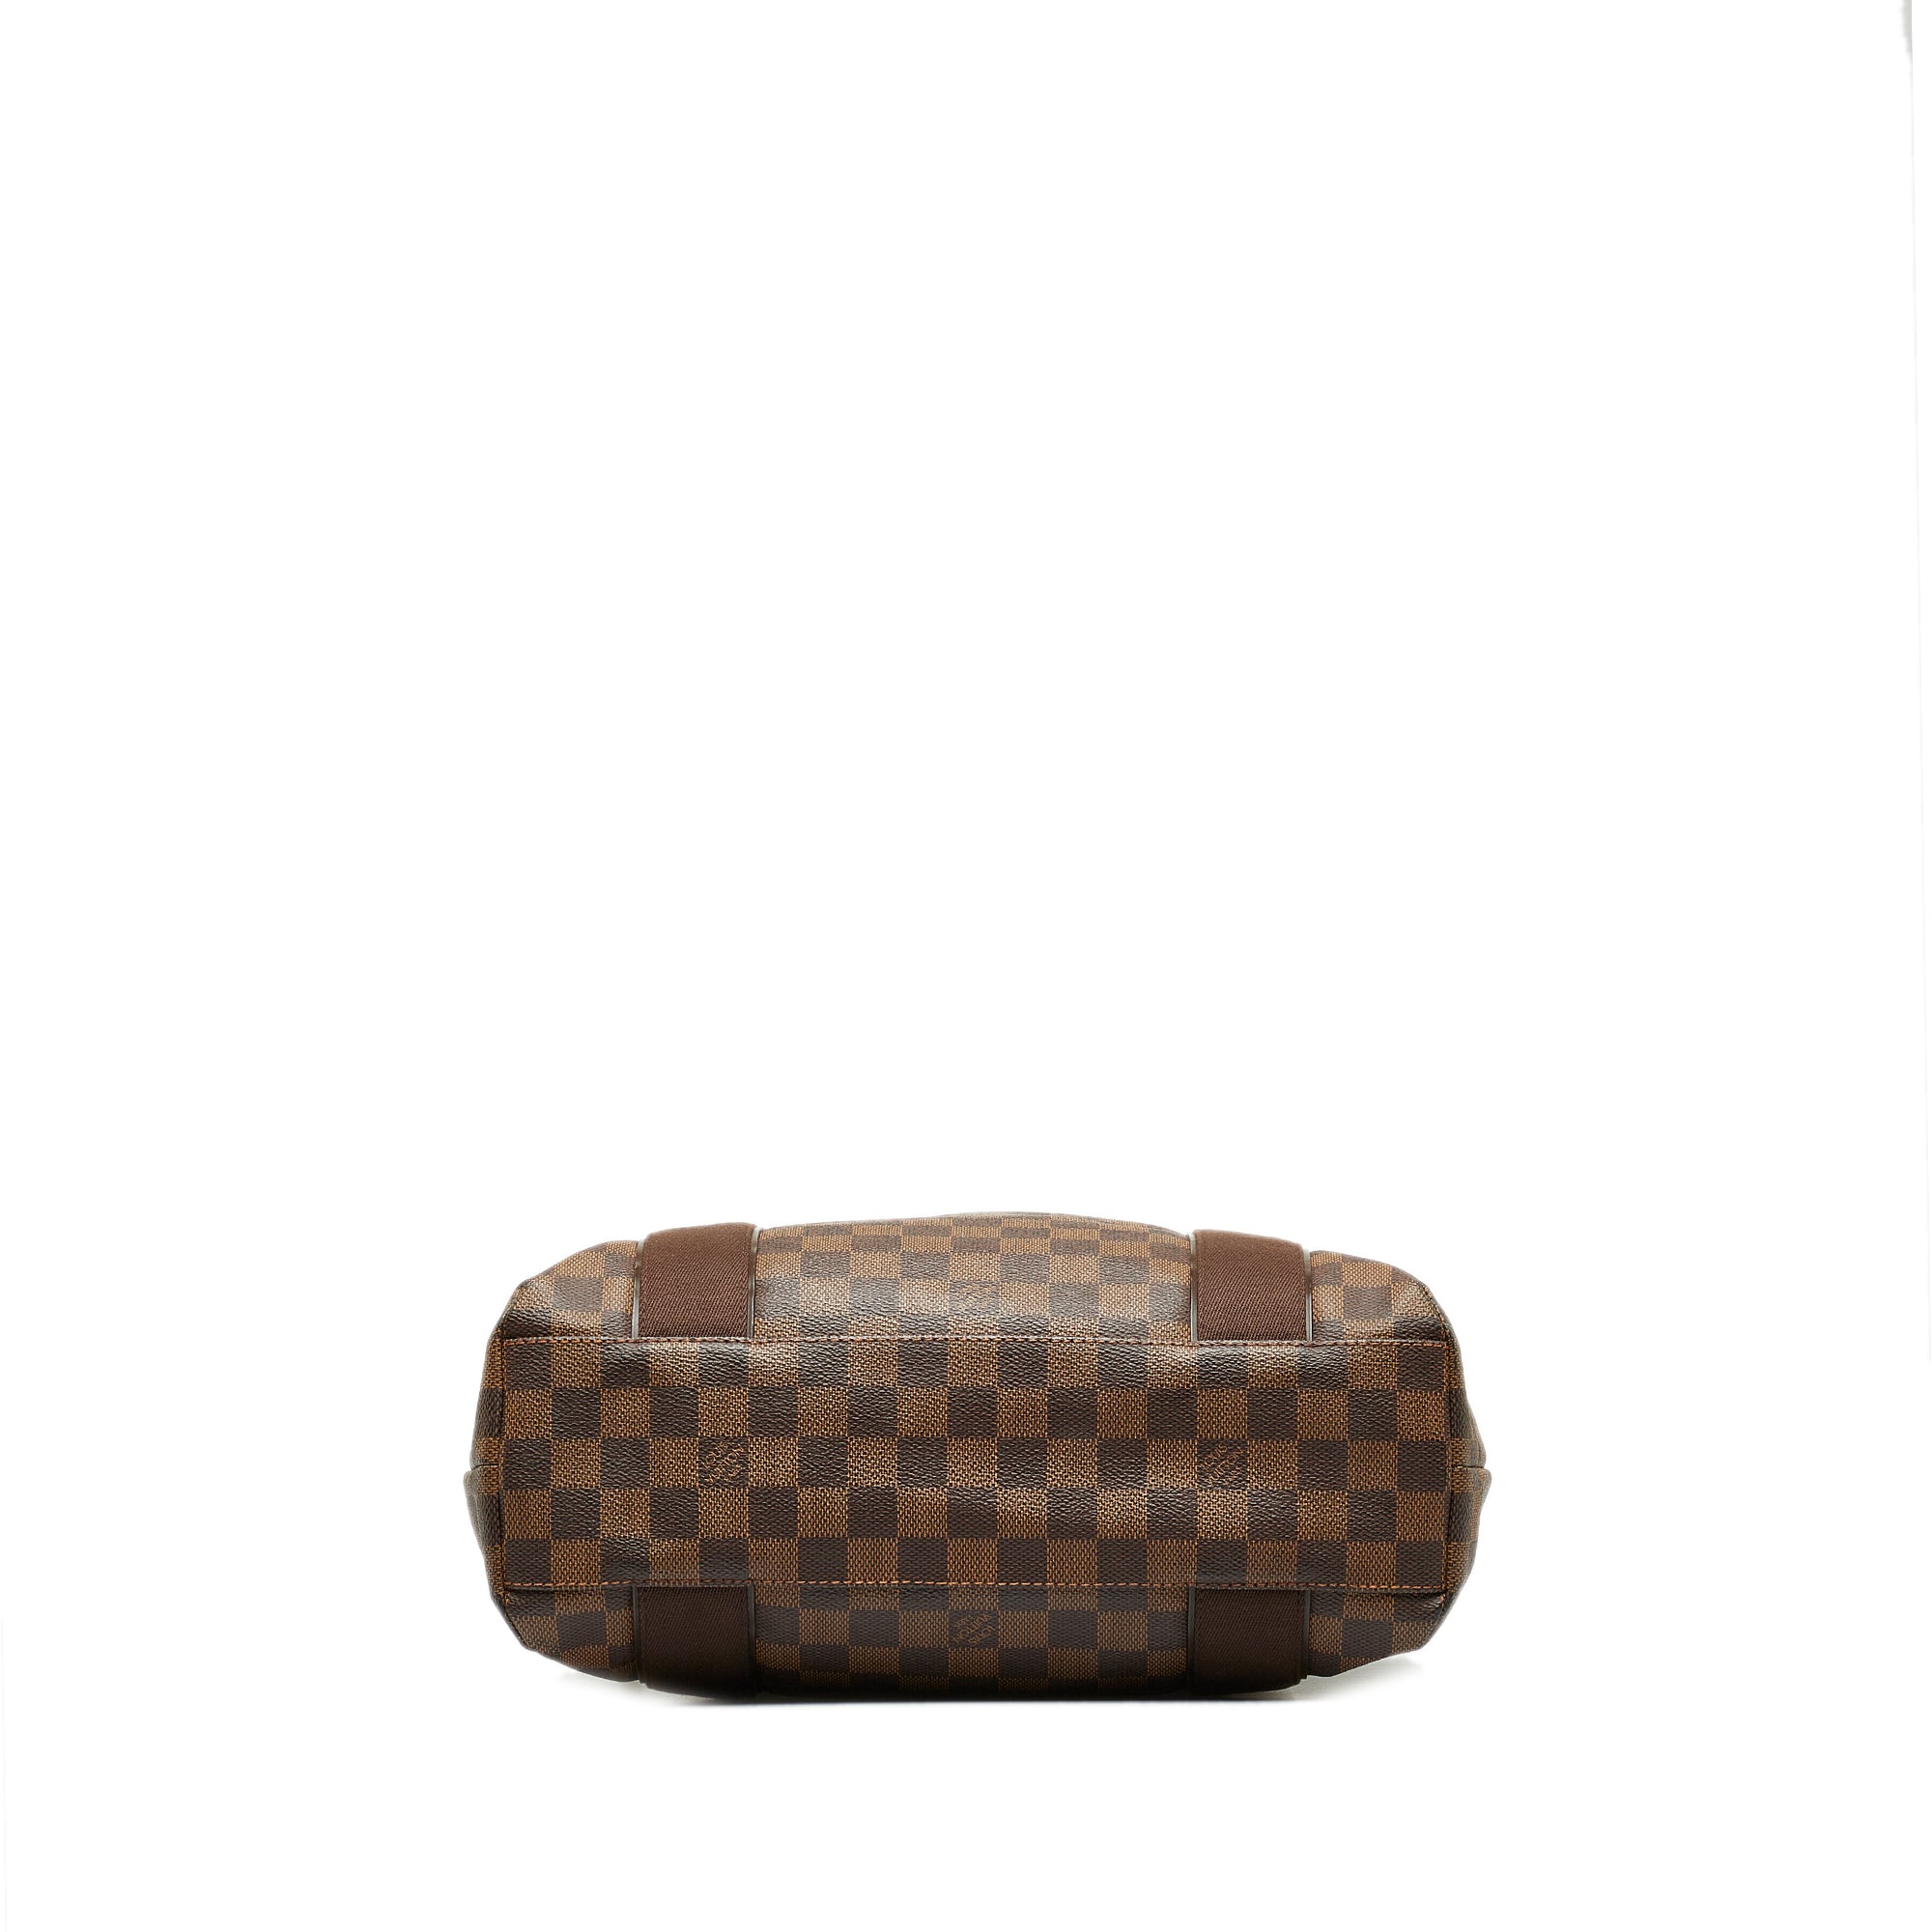 Sell Louis Vuitton Damier Ebene Cabas Beaubourg Tote Bag - Brown